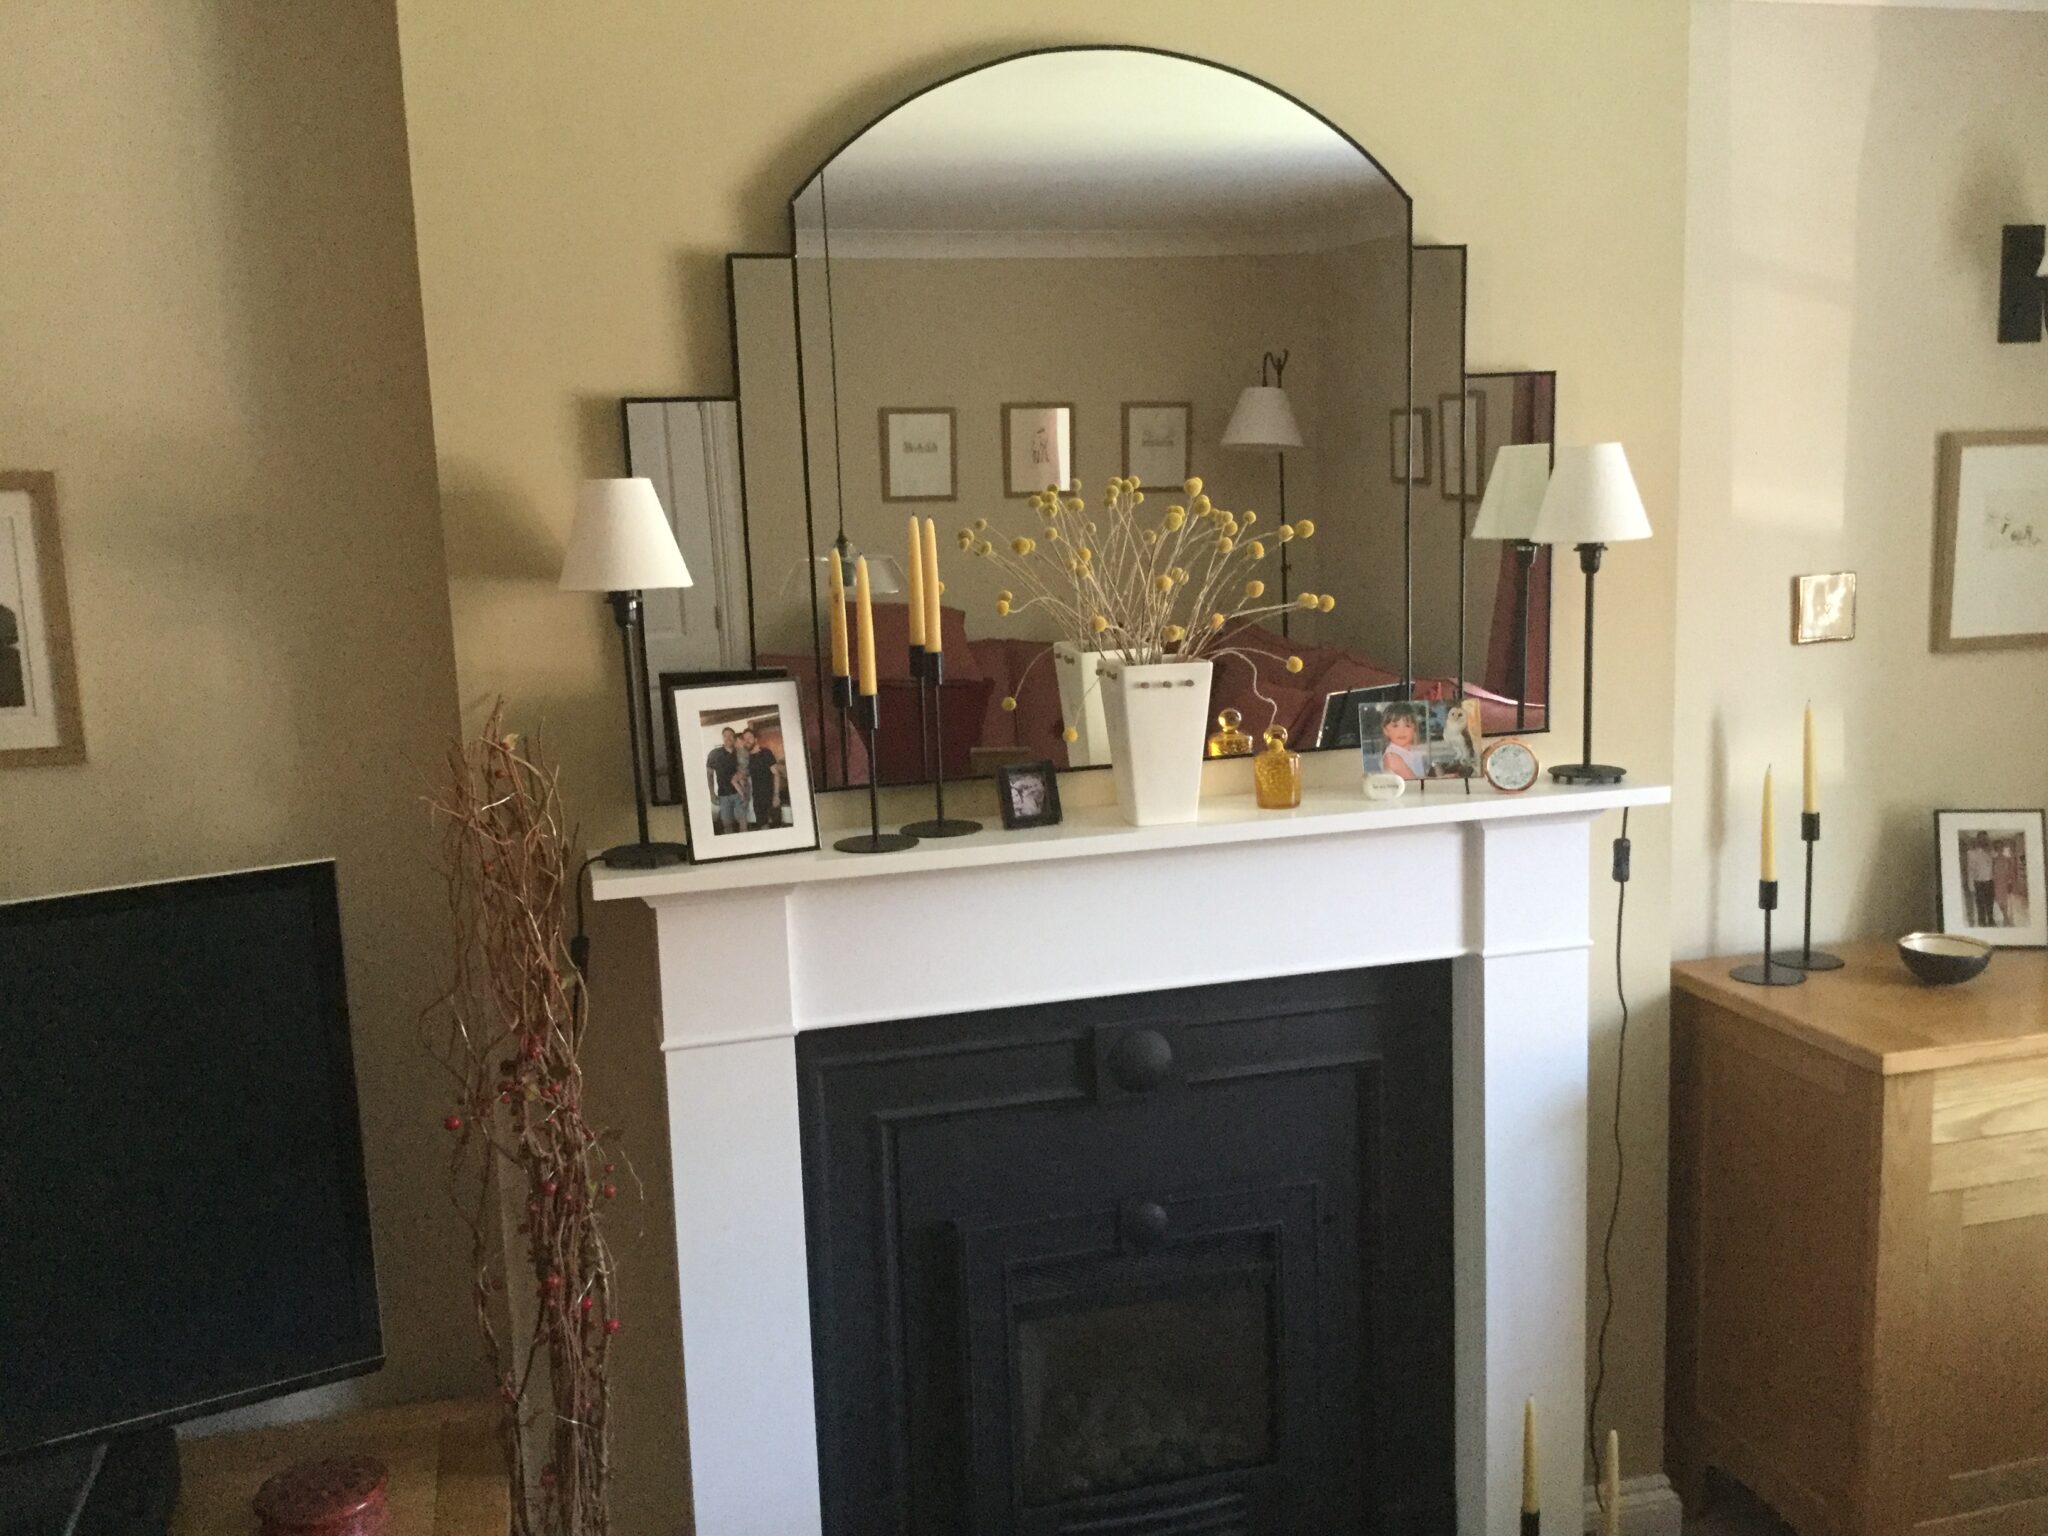 How To Choose A Mirror For Over A Fireplace Bespoke Mirrors Art